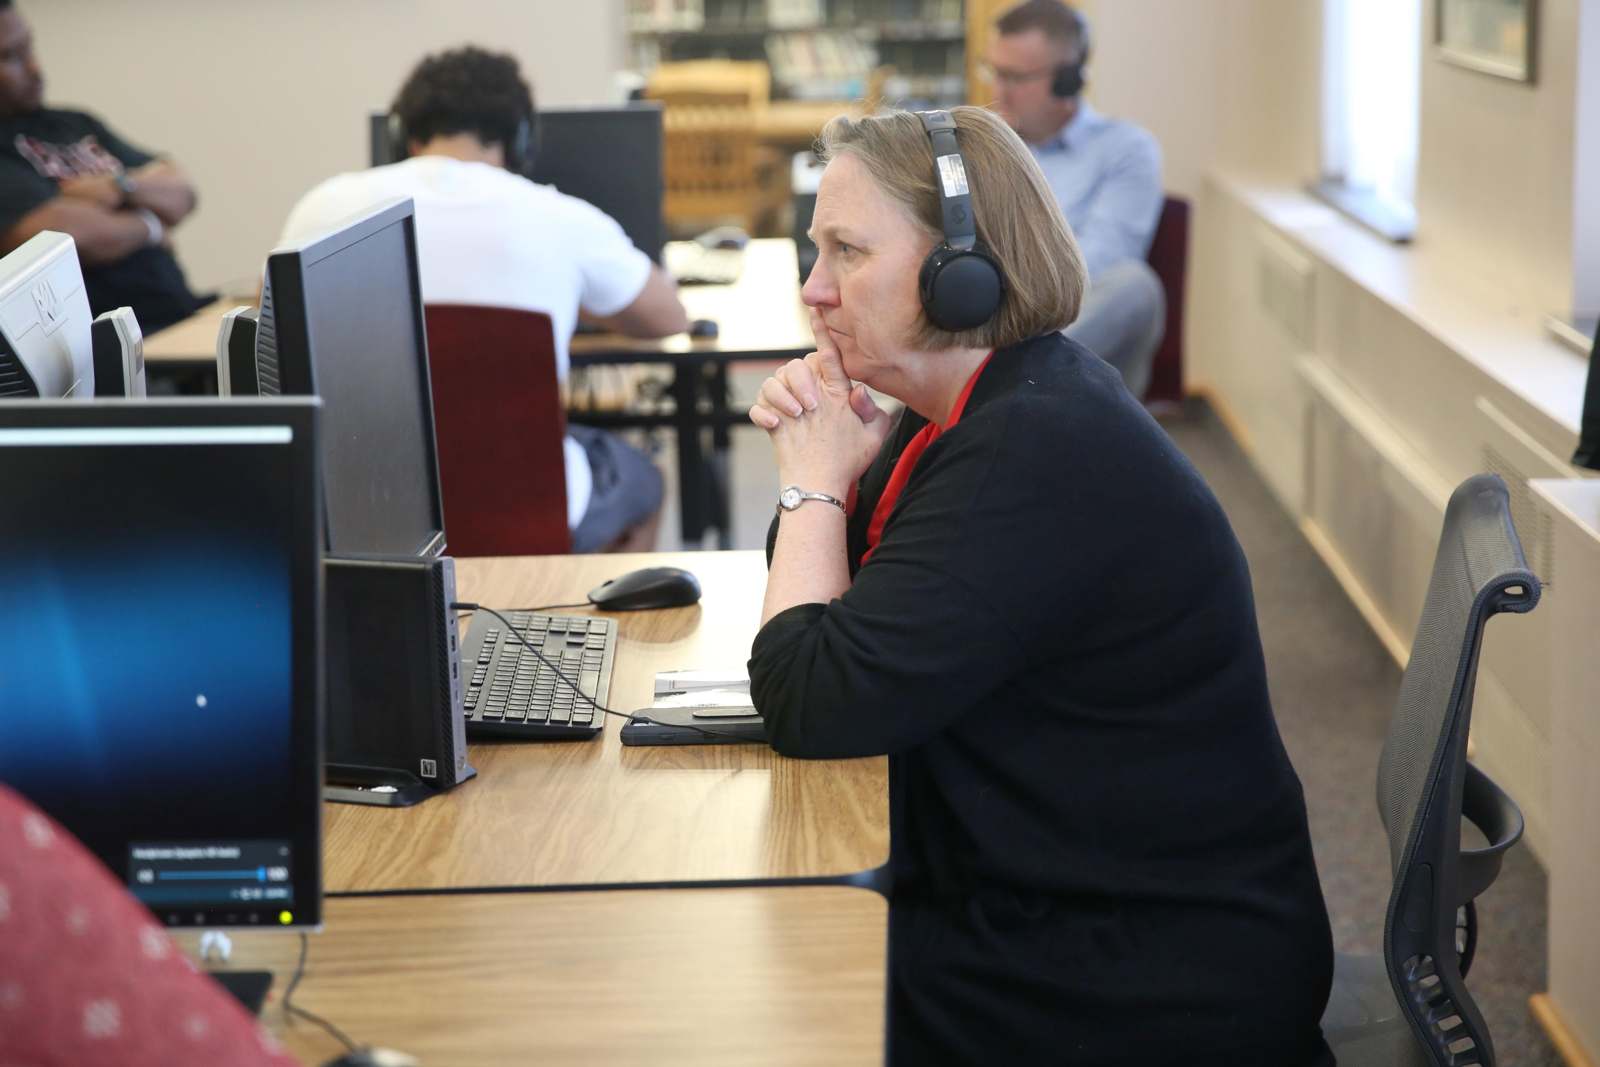 a woman wearing headphones sitting at a desk with other people in the background